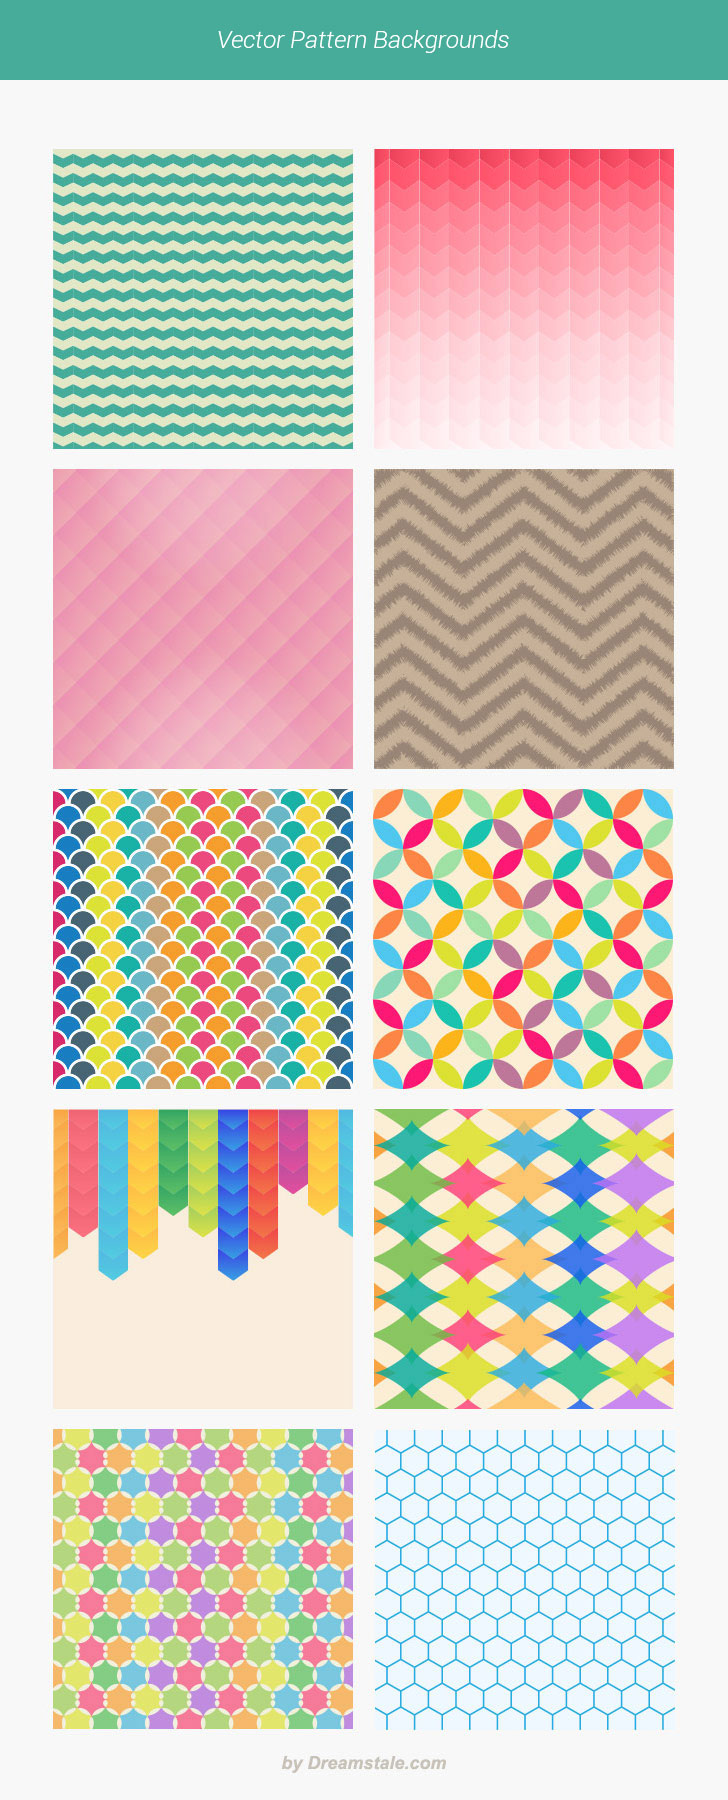 Free vector pattern backgrounds